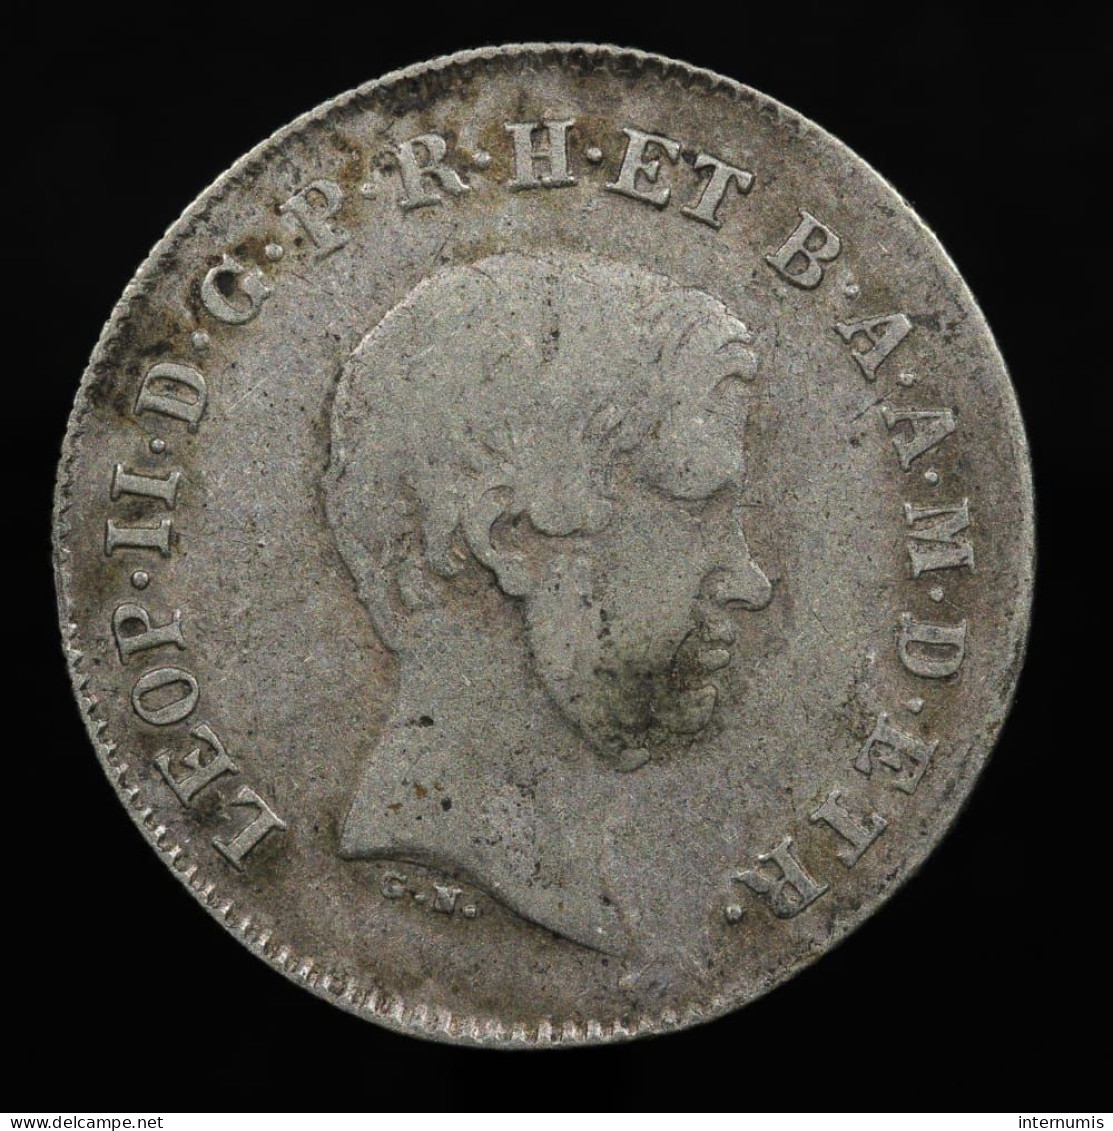 RARE - Italie / Italy, Leopold II, 1 Paolo, 1856, Toscane / Tuscany, Argent (Silver), TB (F), MIR.457, C#70a - Toscana